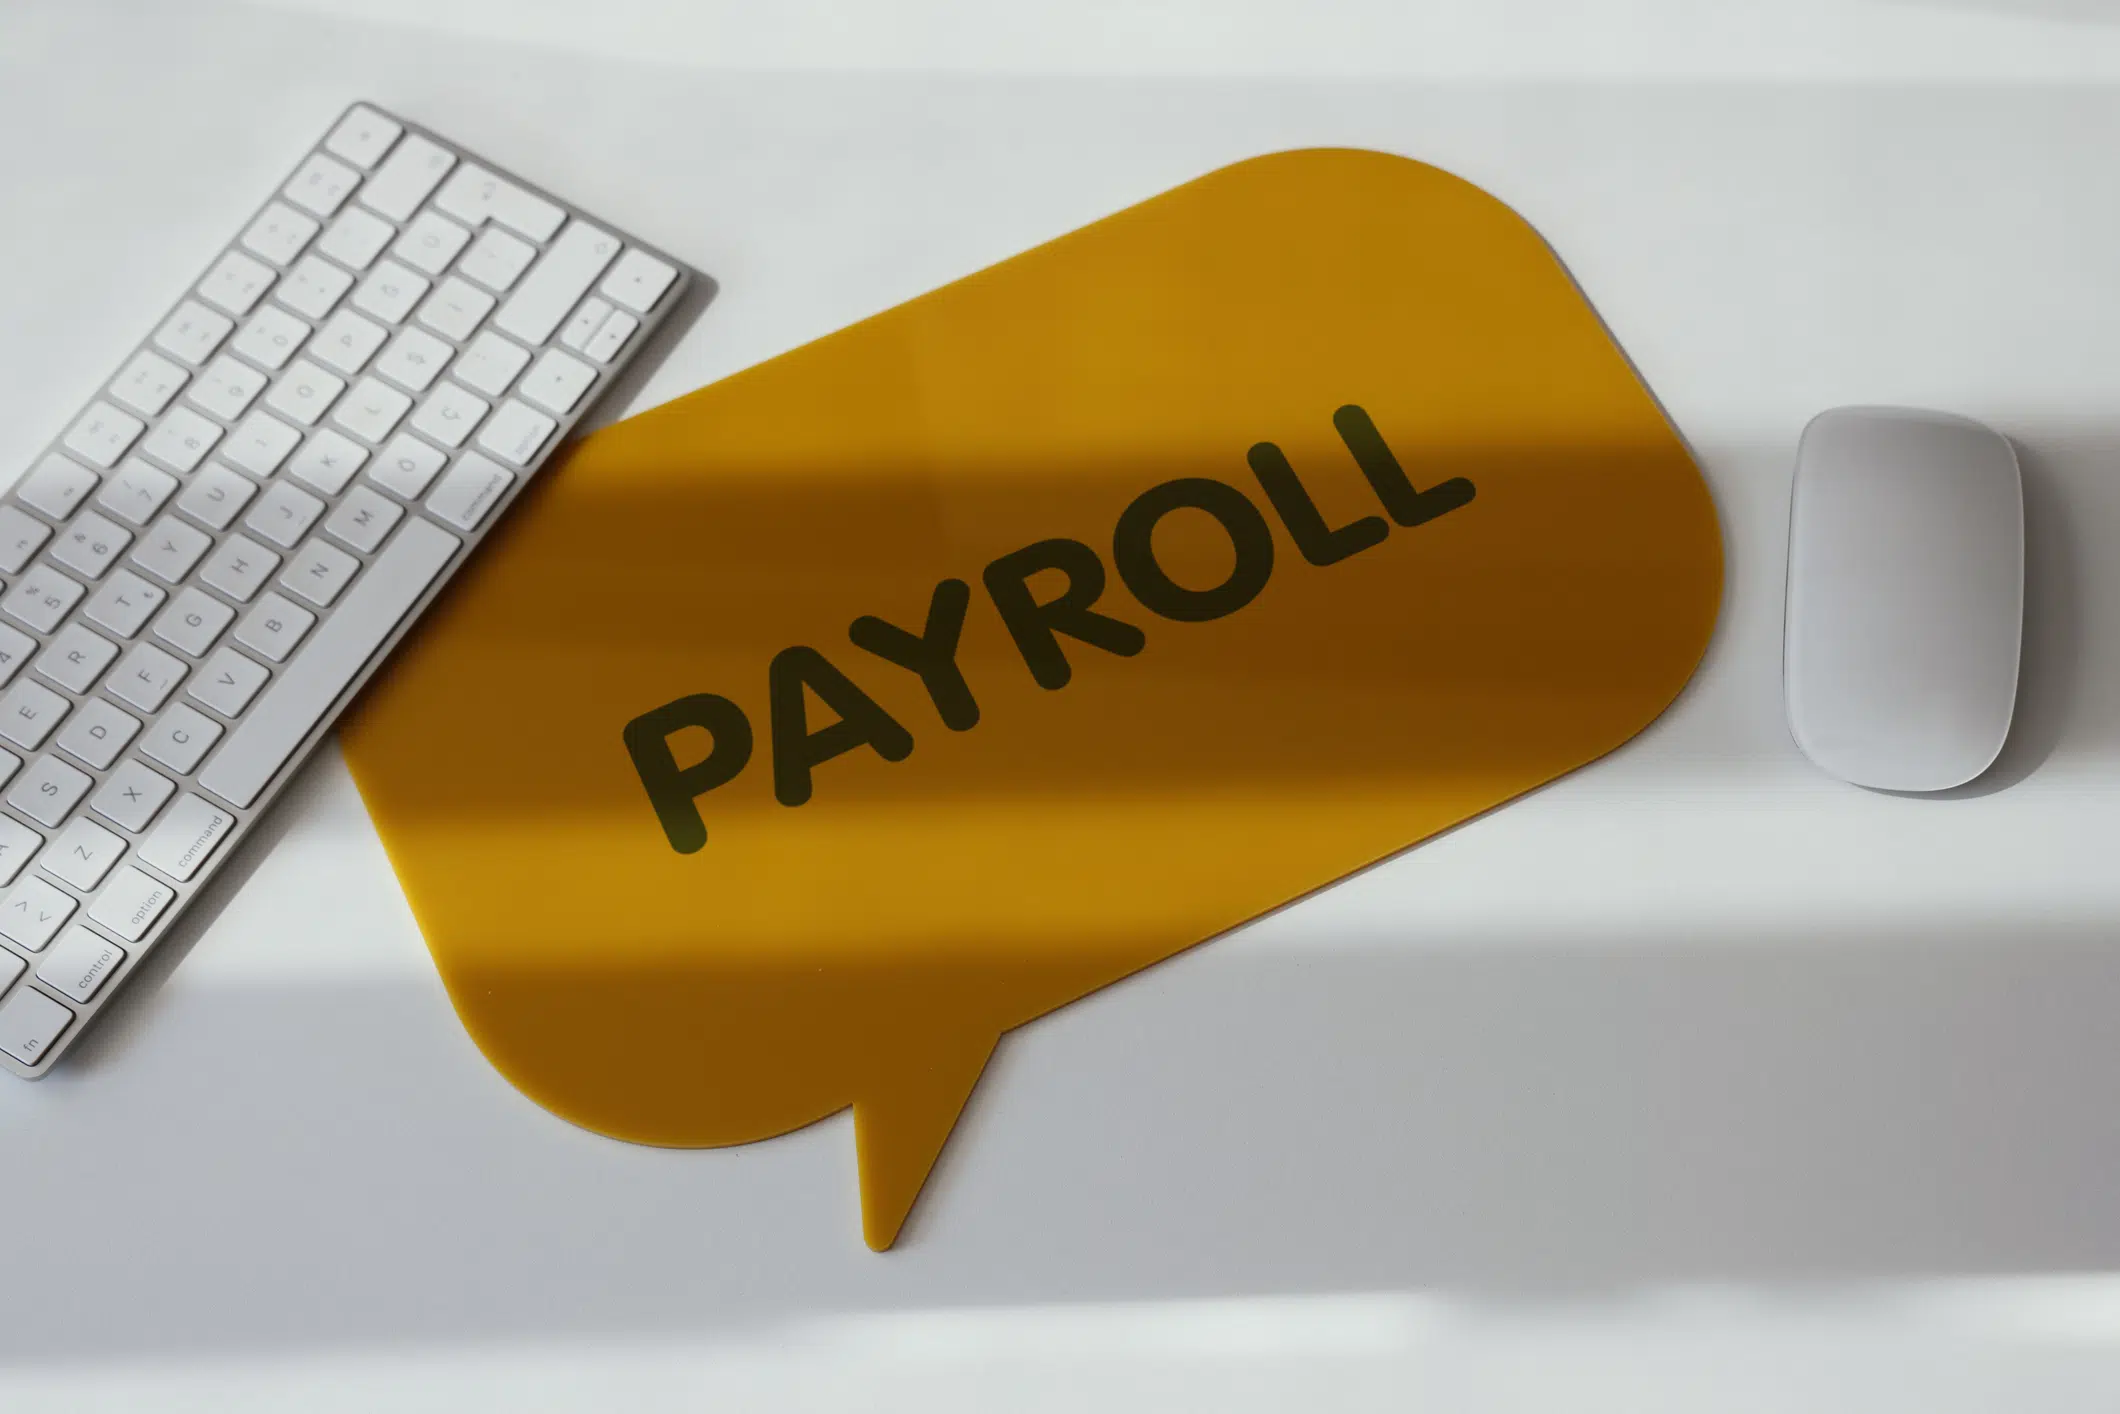 Improve your payroll audits with automation